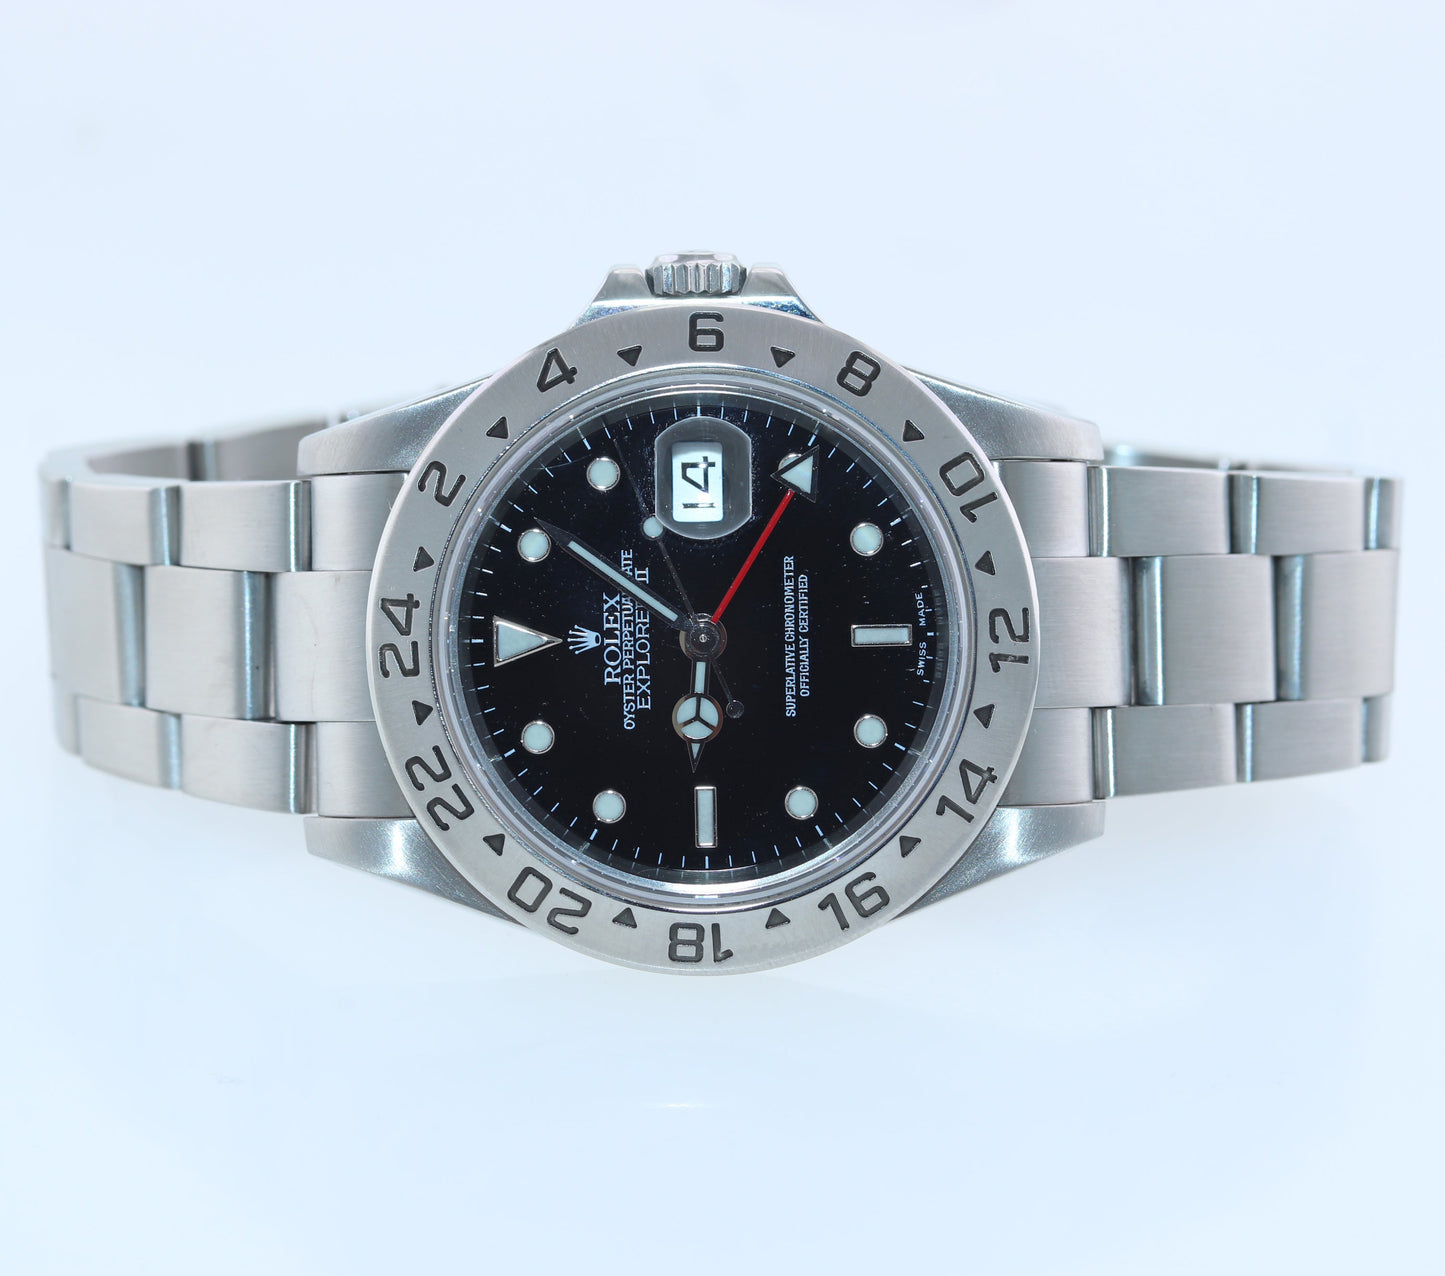 2002 PAPERS Rolex Explorer II 16570 Stainless Steel Black Dial GMT 40mm Watch